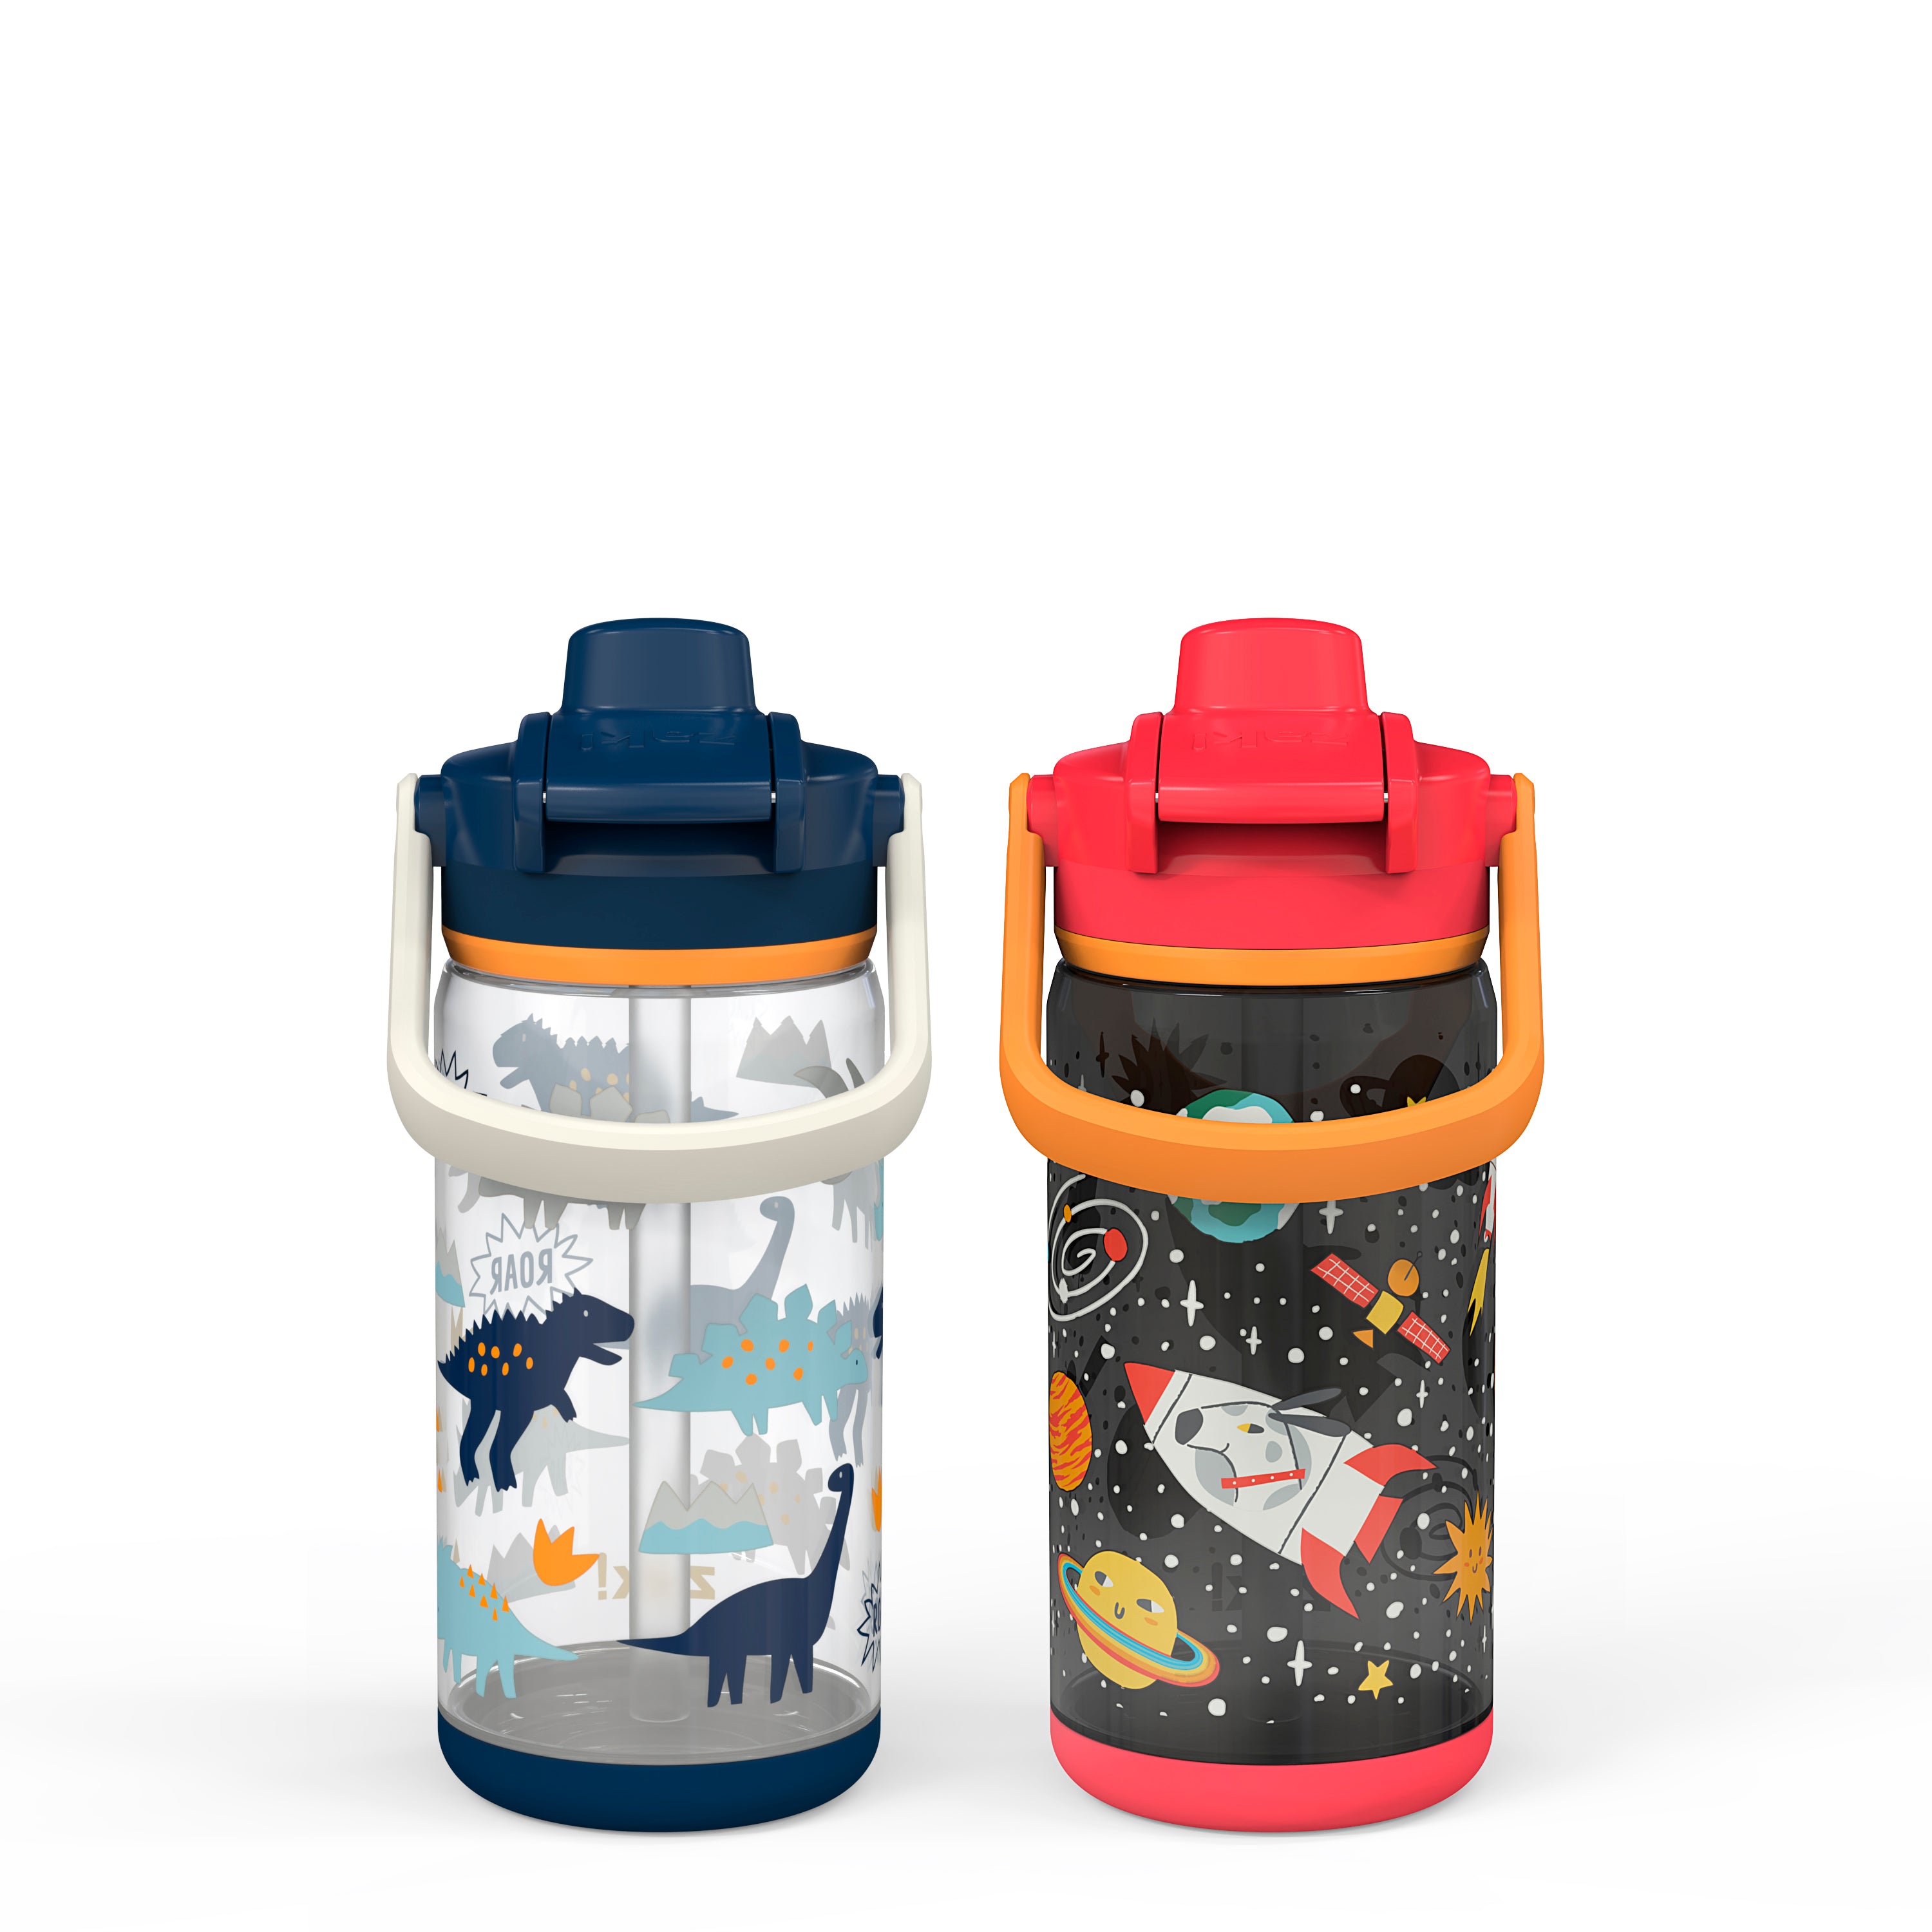 Beacon 2-Piece Kids Water Bottle Set with Covered Spout - Spaceships ...